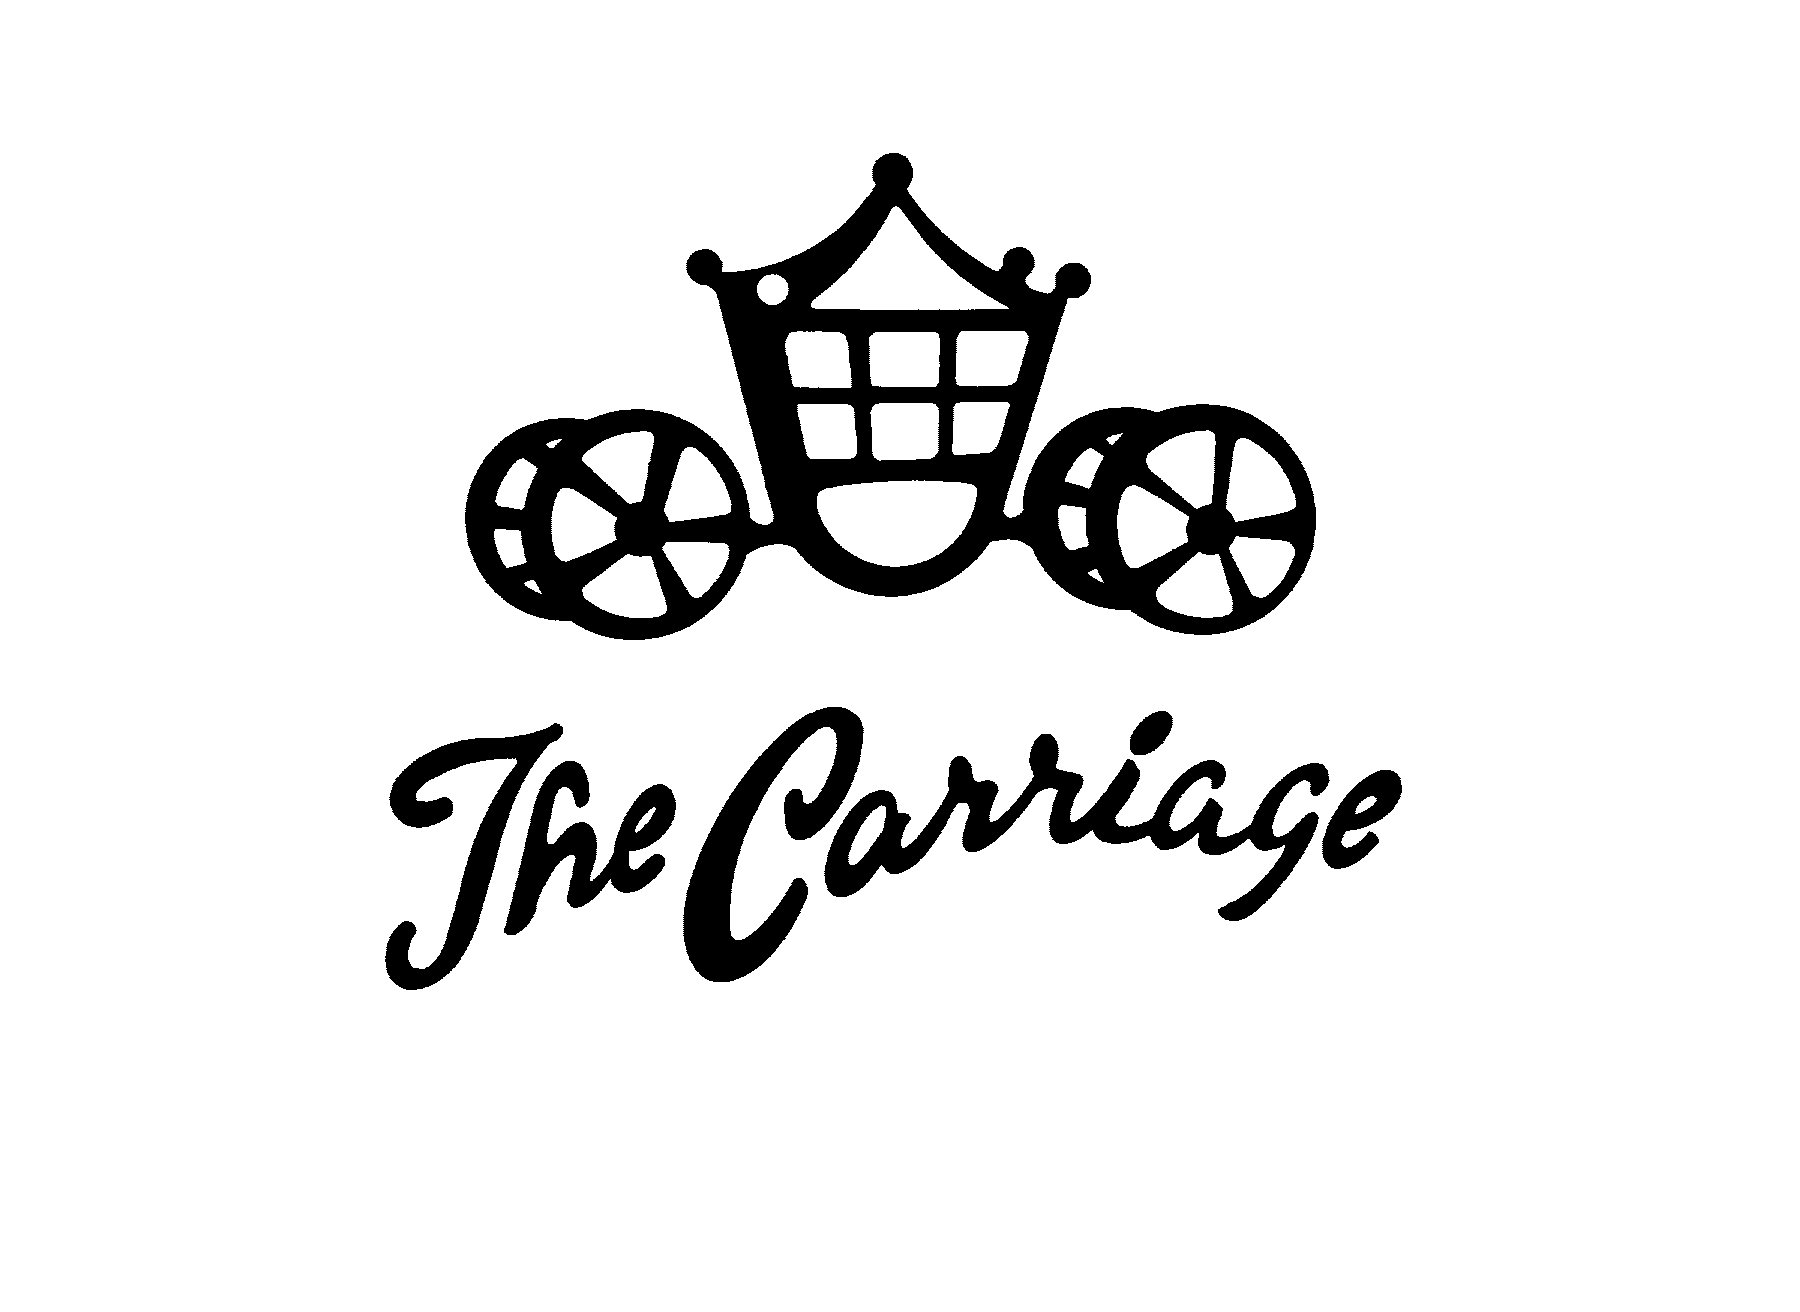  THE CARRIAGE